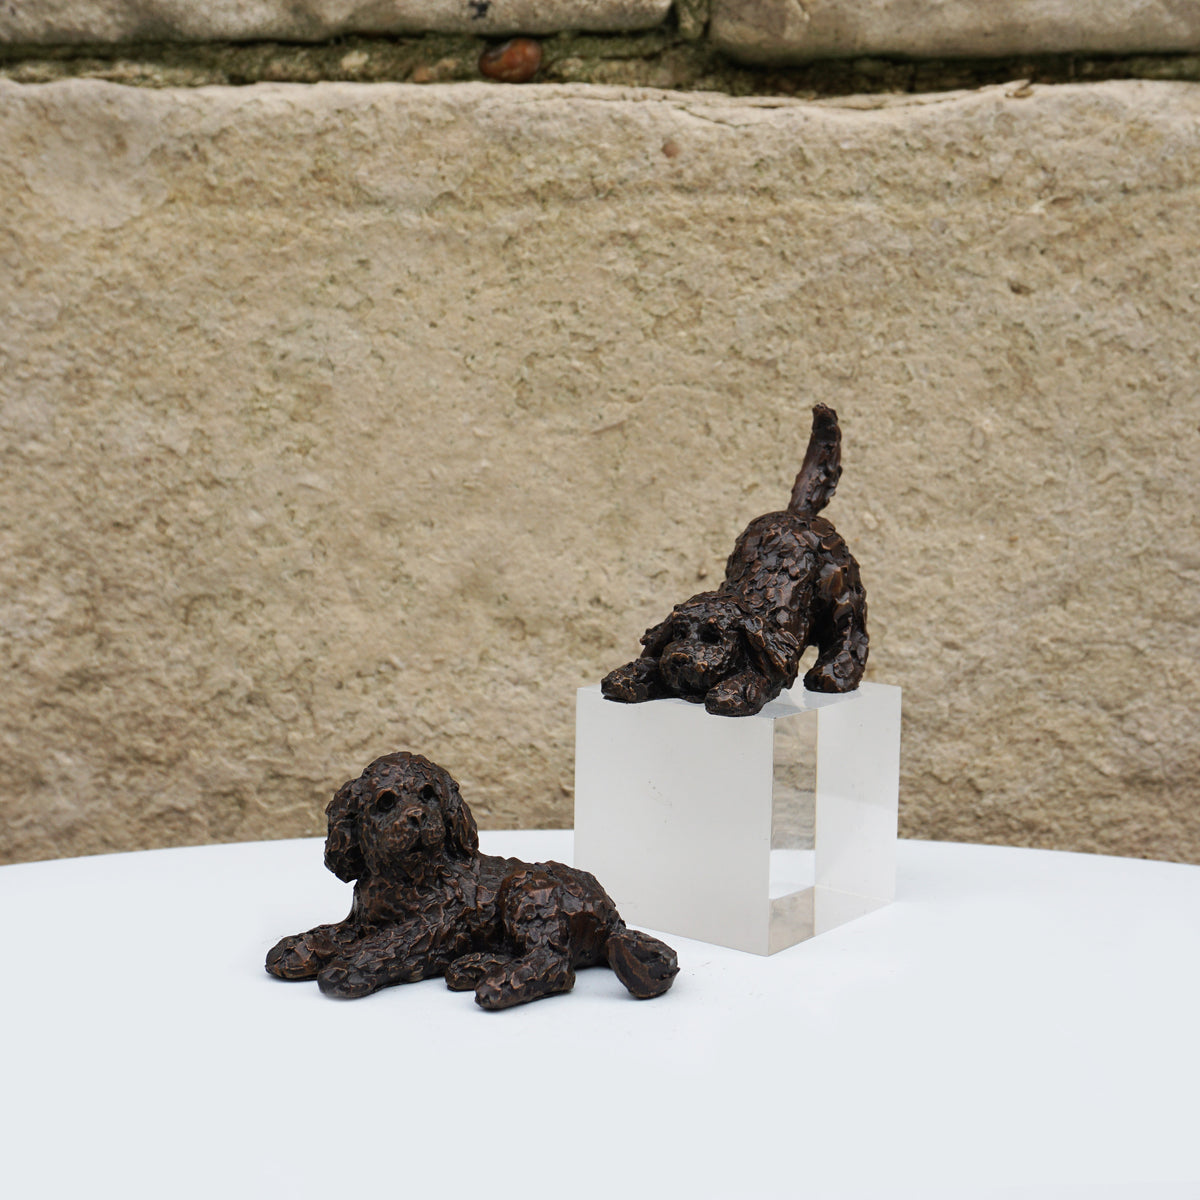 Cockapoo Playing - Solid Bronze